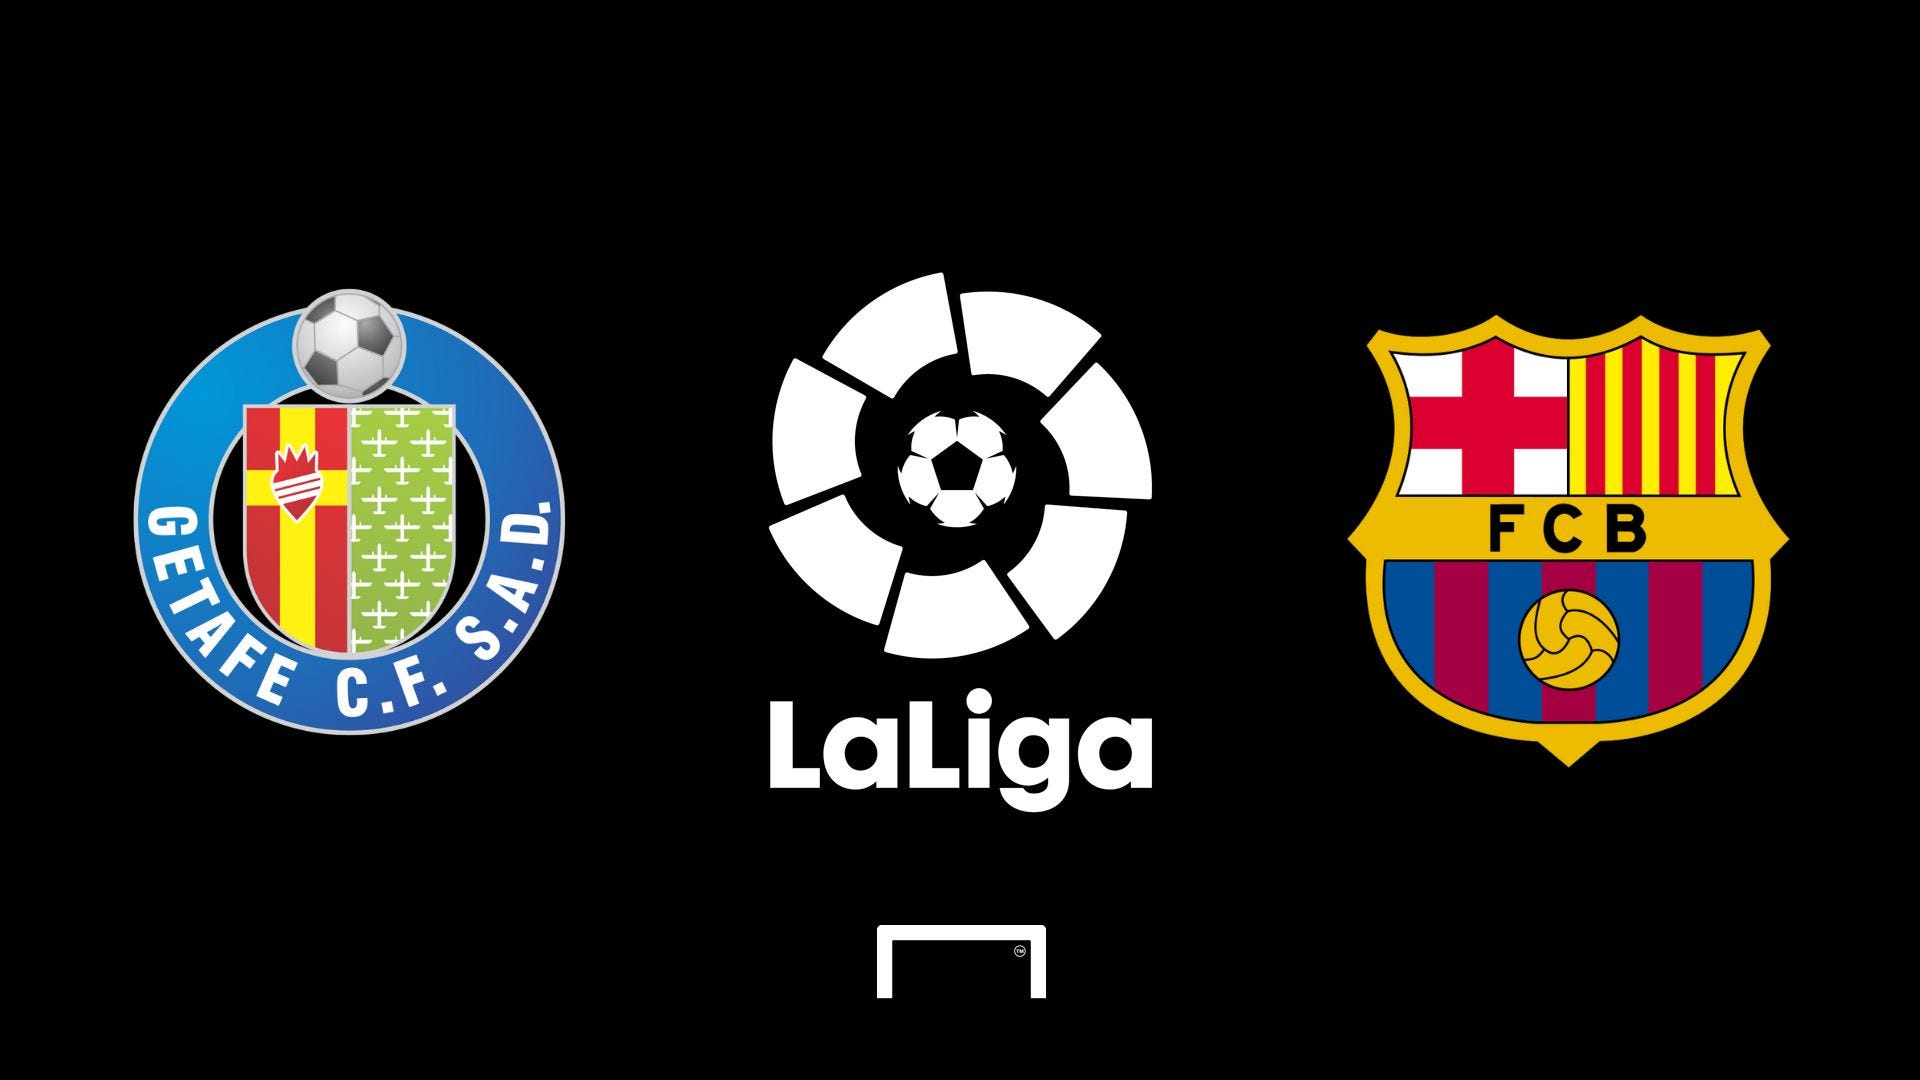 Getafe CF Vs. FC Barcelona Laliga 2023/24: Where To Watch In USA And Others?